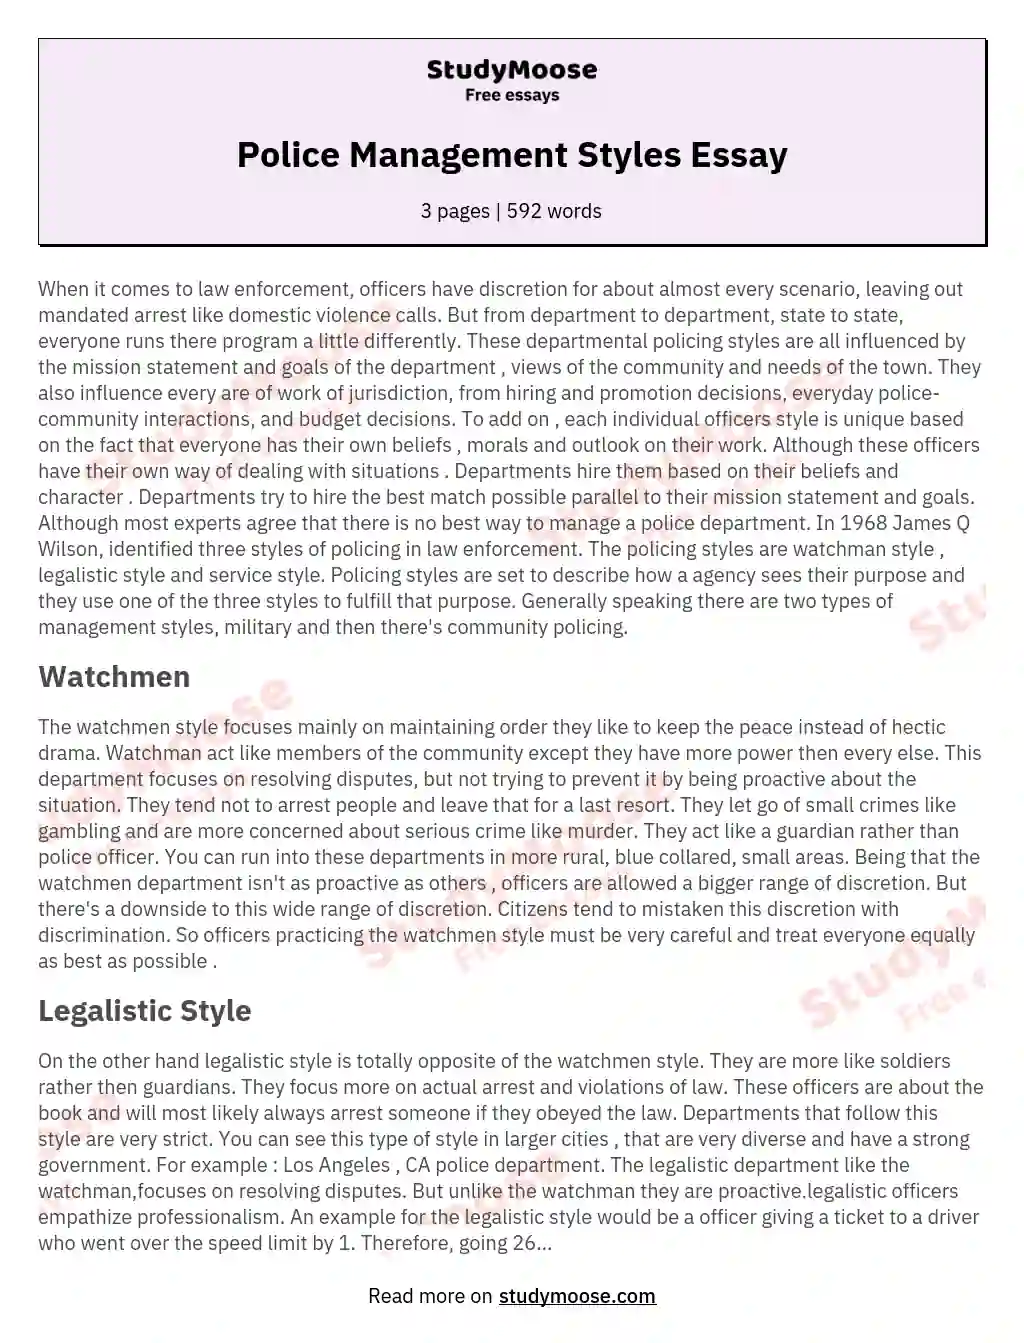 Police Management Styles Essay essay